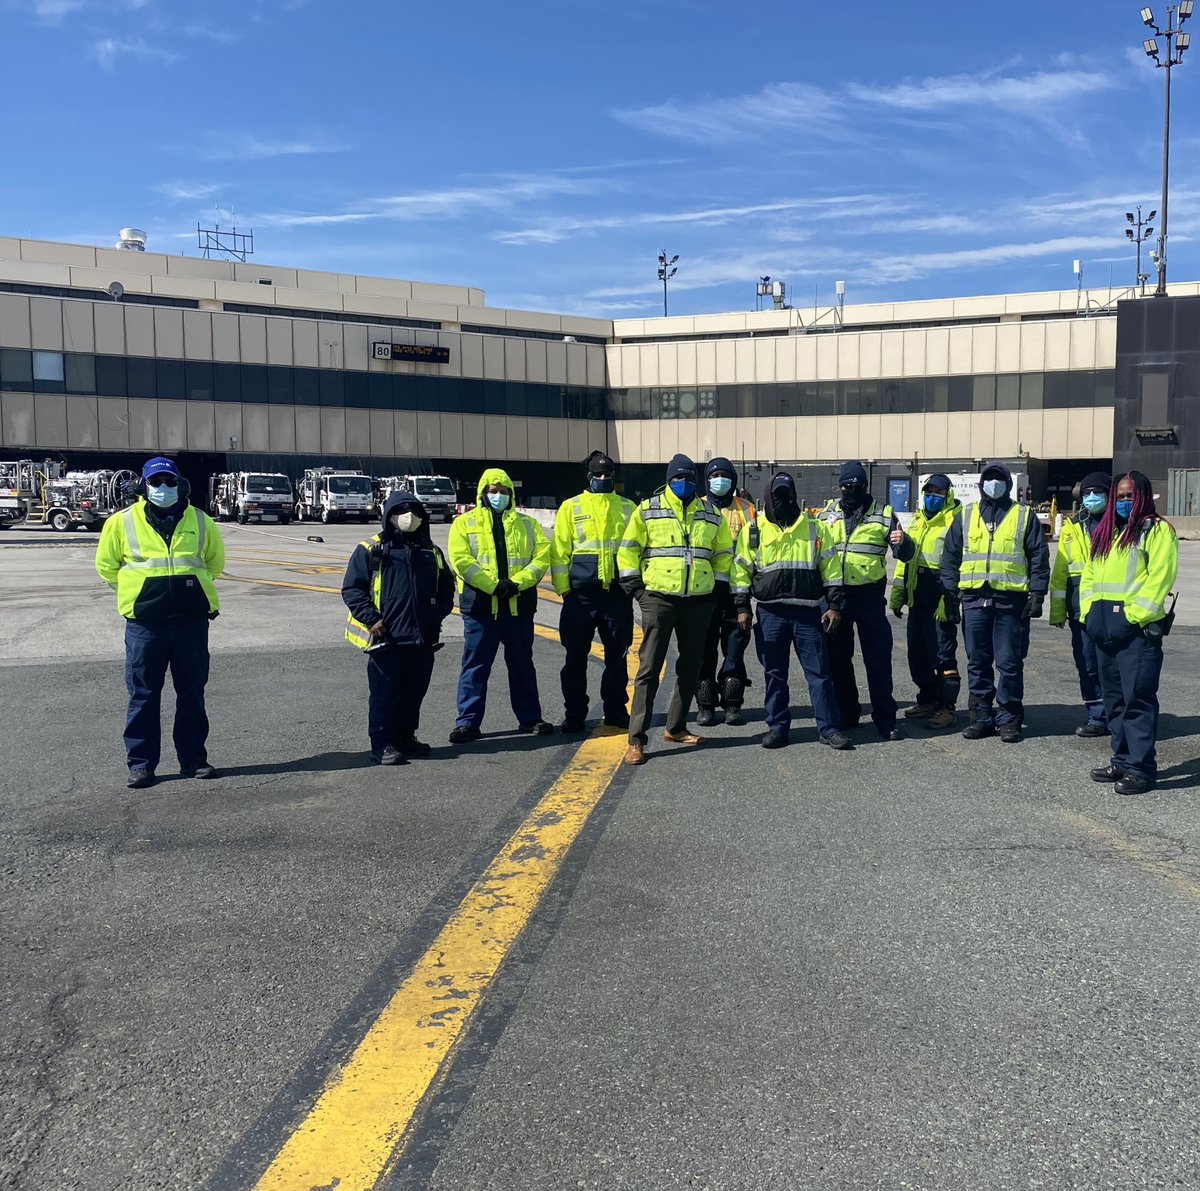 Frontline and Leadership get together for EWR’s Weekly Safety Walk. With every step and every walk we move toward a Safer United!! Have a United Day!! @EWRmike @susannesworld @TheRealMLHJR @CamachoN20 @weareunited #EWRProud @AOsafetyual #Safetyiownit #beinunited @AOQC_EWR